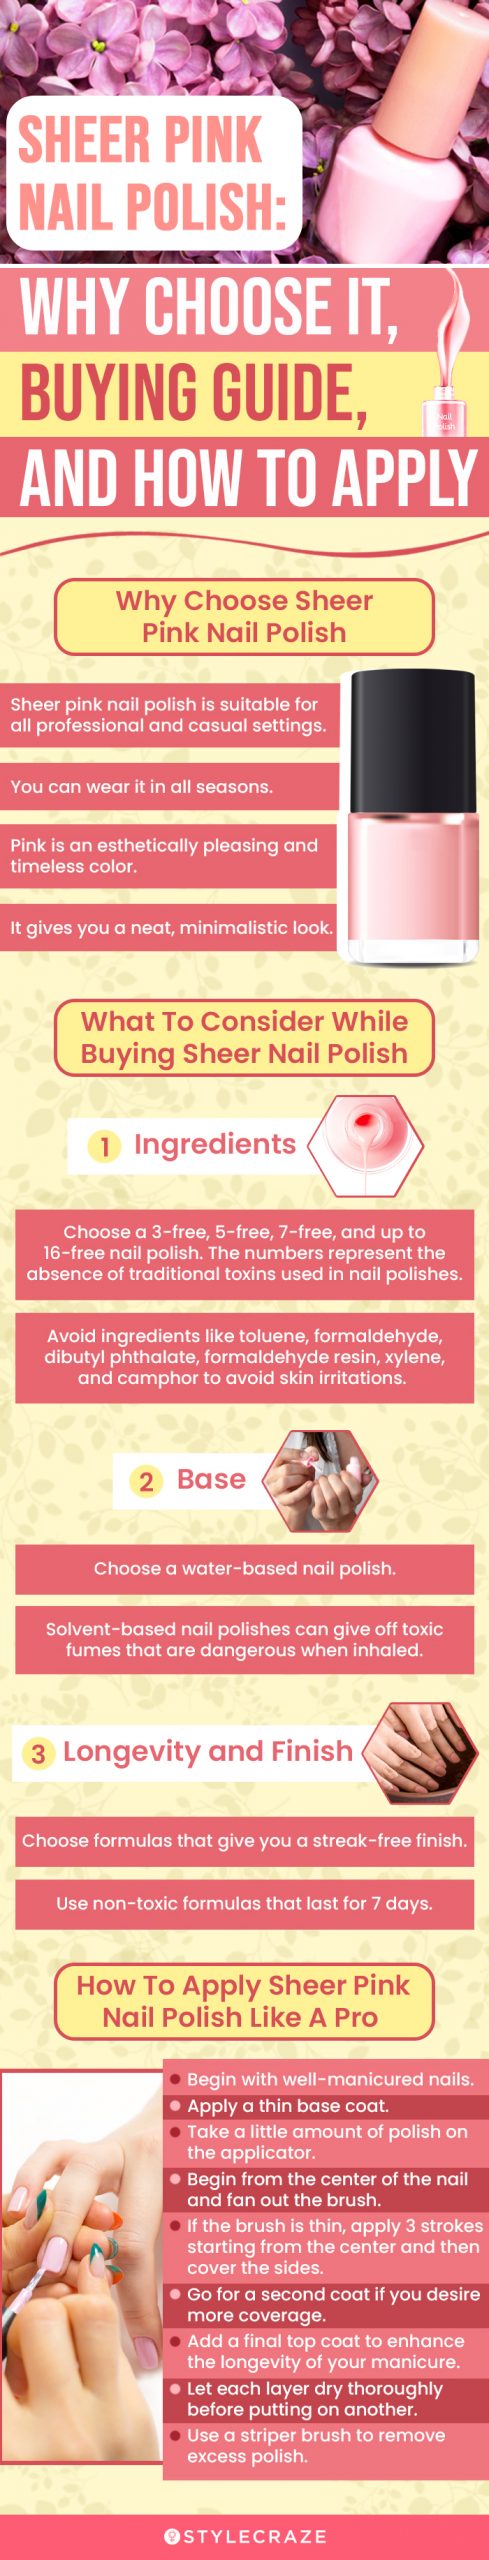 Sheer Pink Nail Polish: Why Choose It, Buying Guide, And How To Apply (infographic)